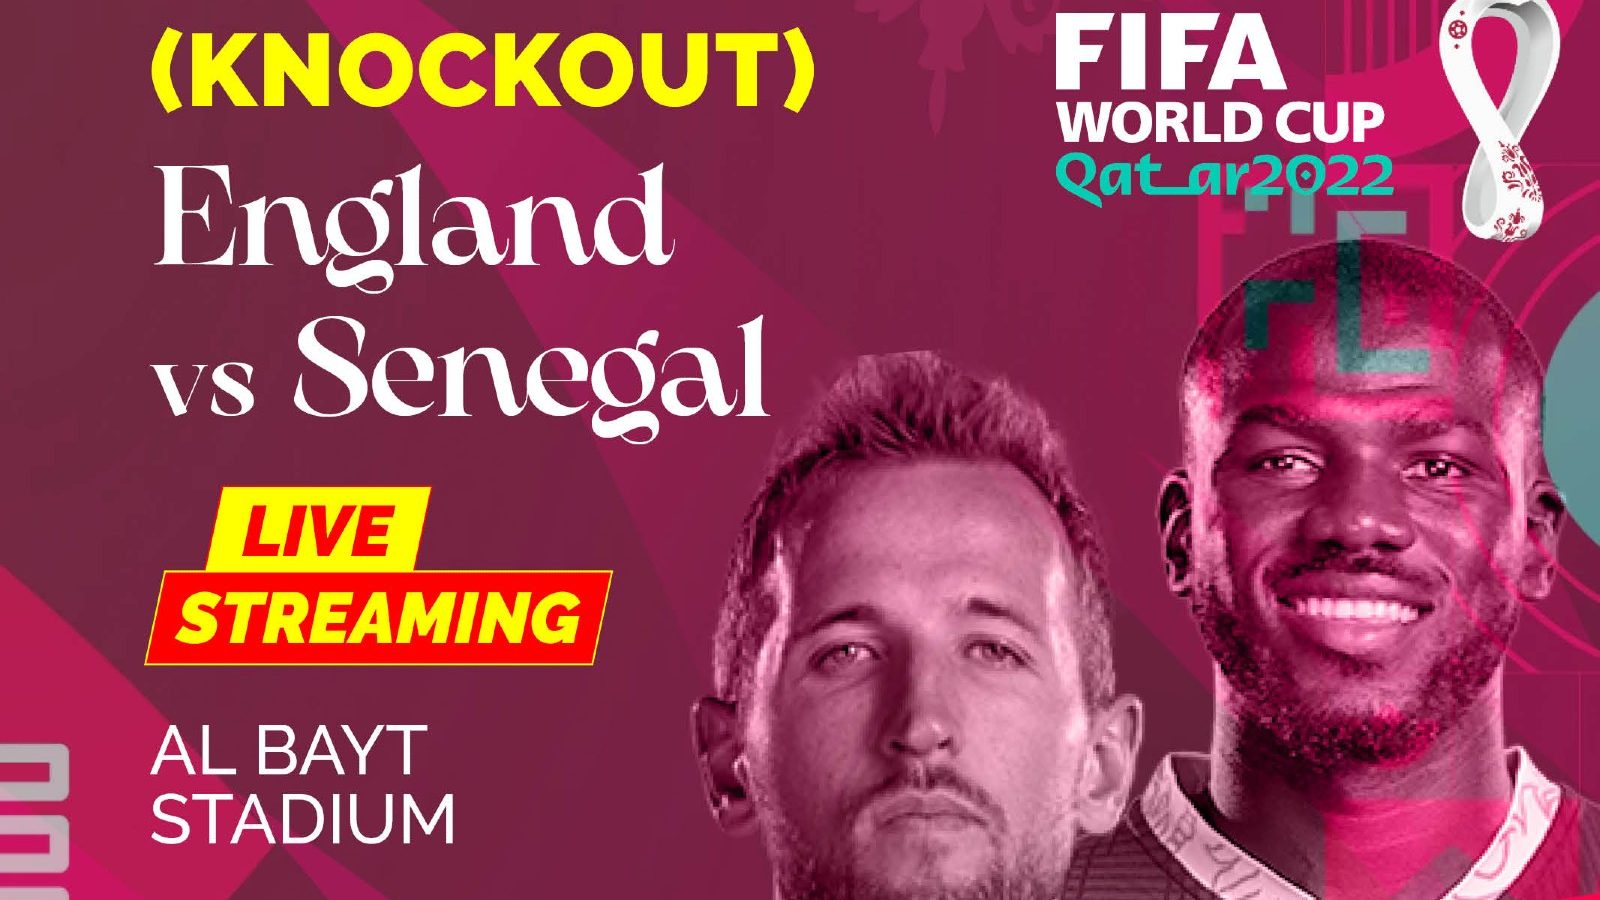 England vs Senegal Live Streaming When and Where to Watch FIFA World Cup 2022 Live Coverage on Live TV Online